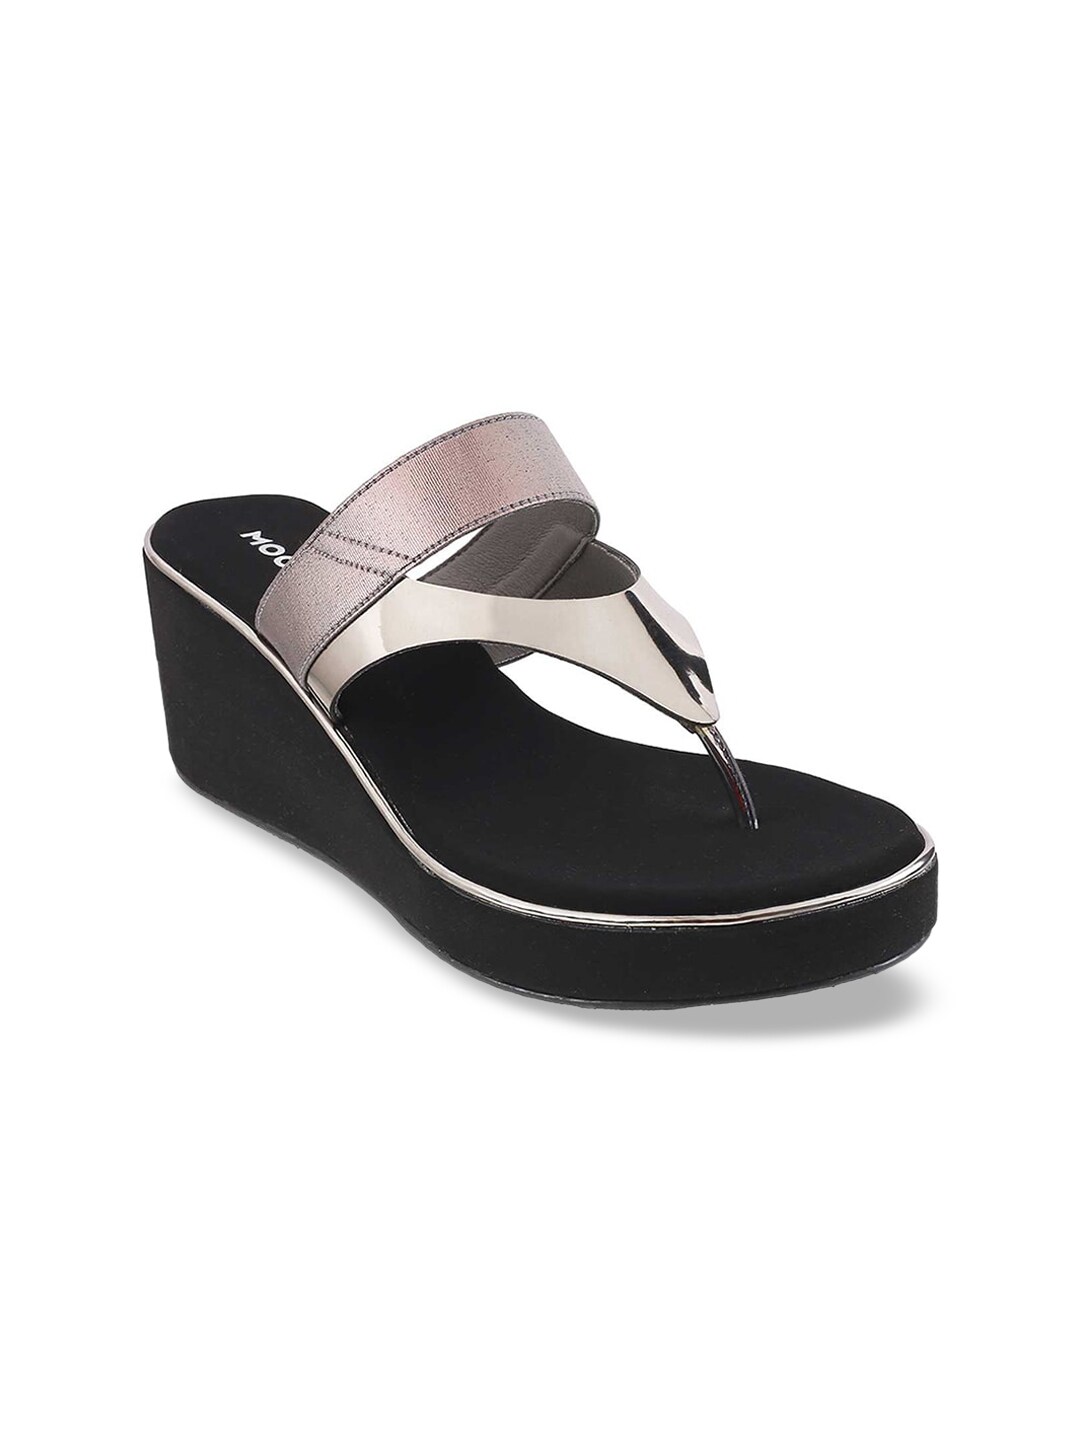 Mochi Grey Wedge Sandals Price in India